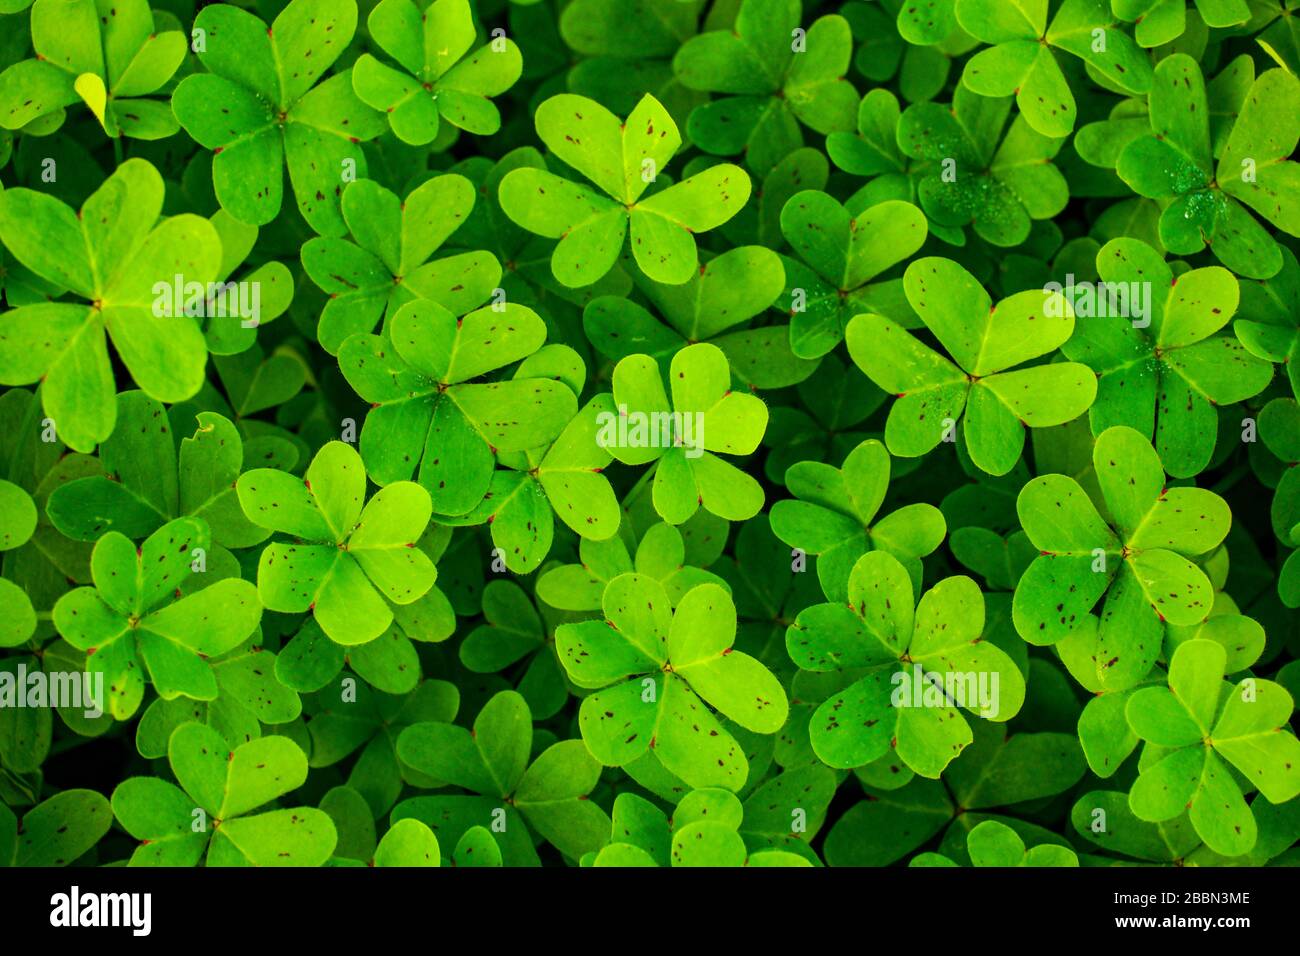 St Patrick's Day: The difference between a shamrock and a four-leaf clover